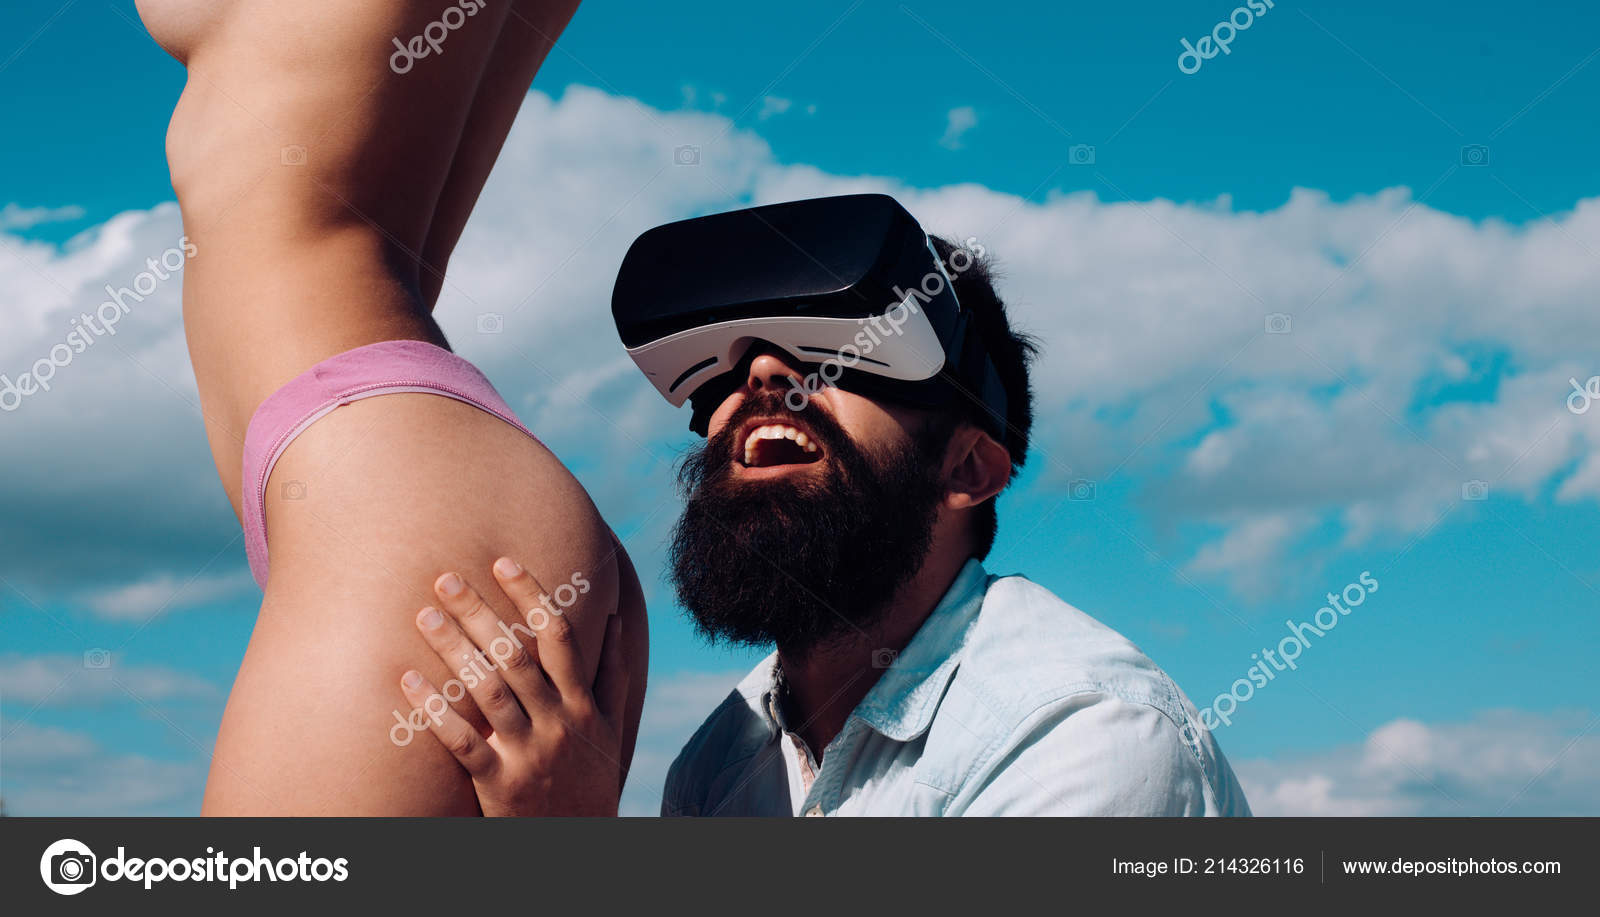 Virtual sex addiction. VR porn is here. Virtual Sex Machine. Fantasies of Subjectivity and Embodiment. Young naked couple with VR headset pic